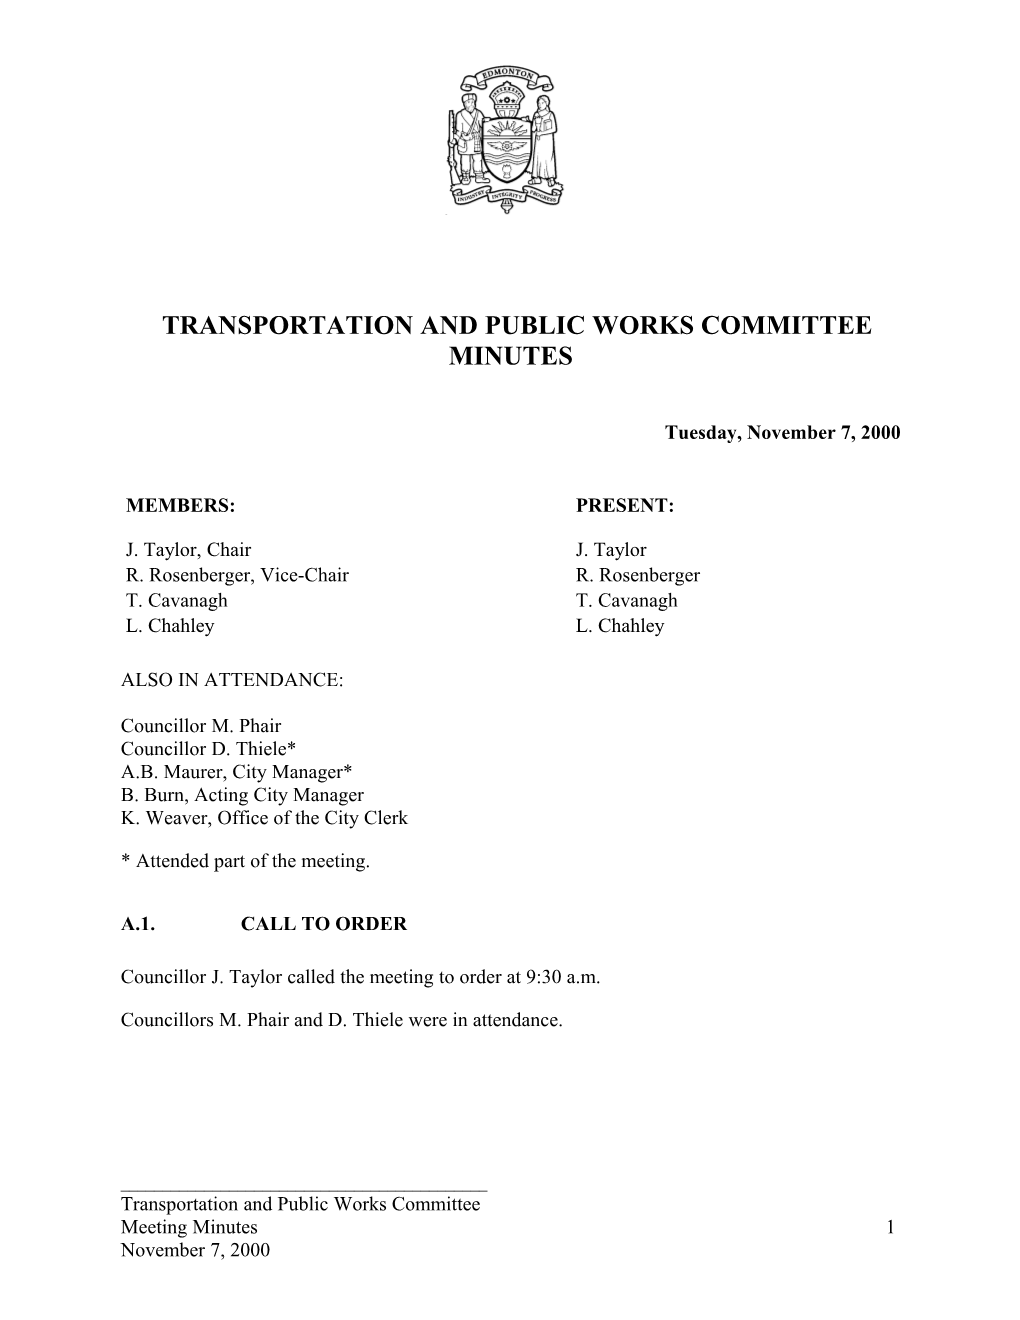 Minutes for Transportation and Public Works Committee November 7, 2000 Meeting